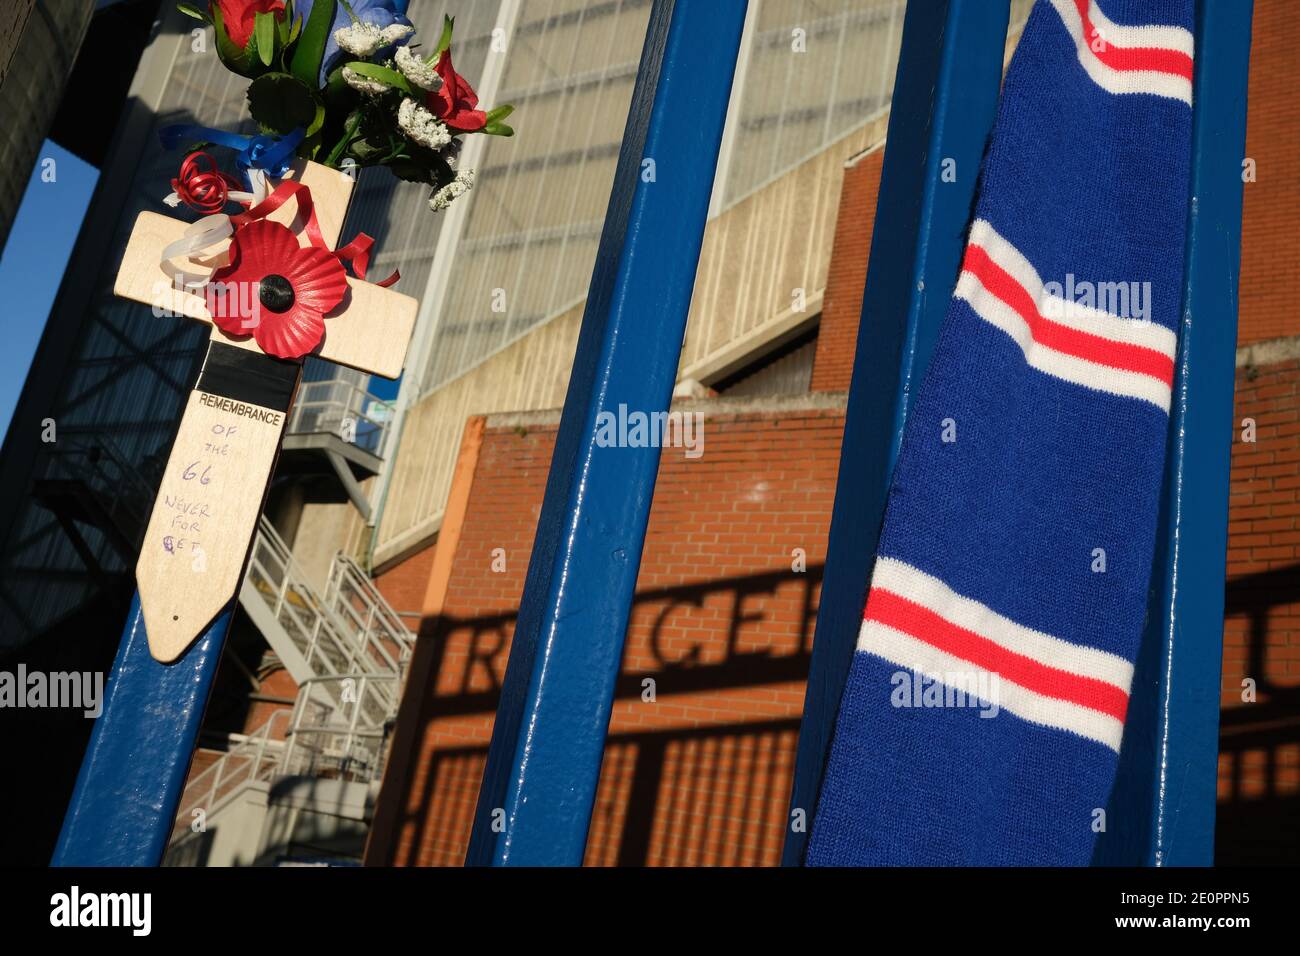 Glasgow, UK, 2 January 2021. Supporters of Rangers Football Club tie scarves on the club's stadium gate, in memory of those 66 fans who lost their life in the Ibrox Stadium disaster which happened 50-years ago today on 2nd January 1971. The anniversary falls on the day that Rangers FC plays their rivals Celtic FC, at home, in a League game. Photo: JeremyS utton-Hibbert/Alamy Live News. Stock Photo